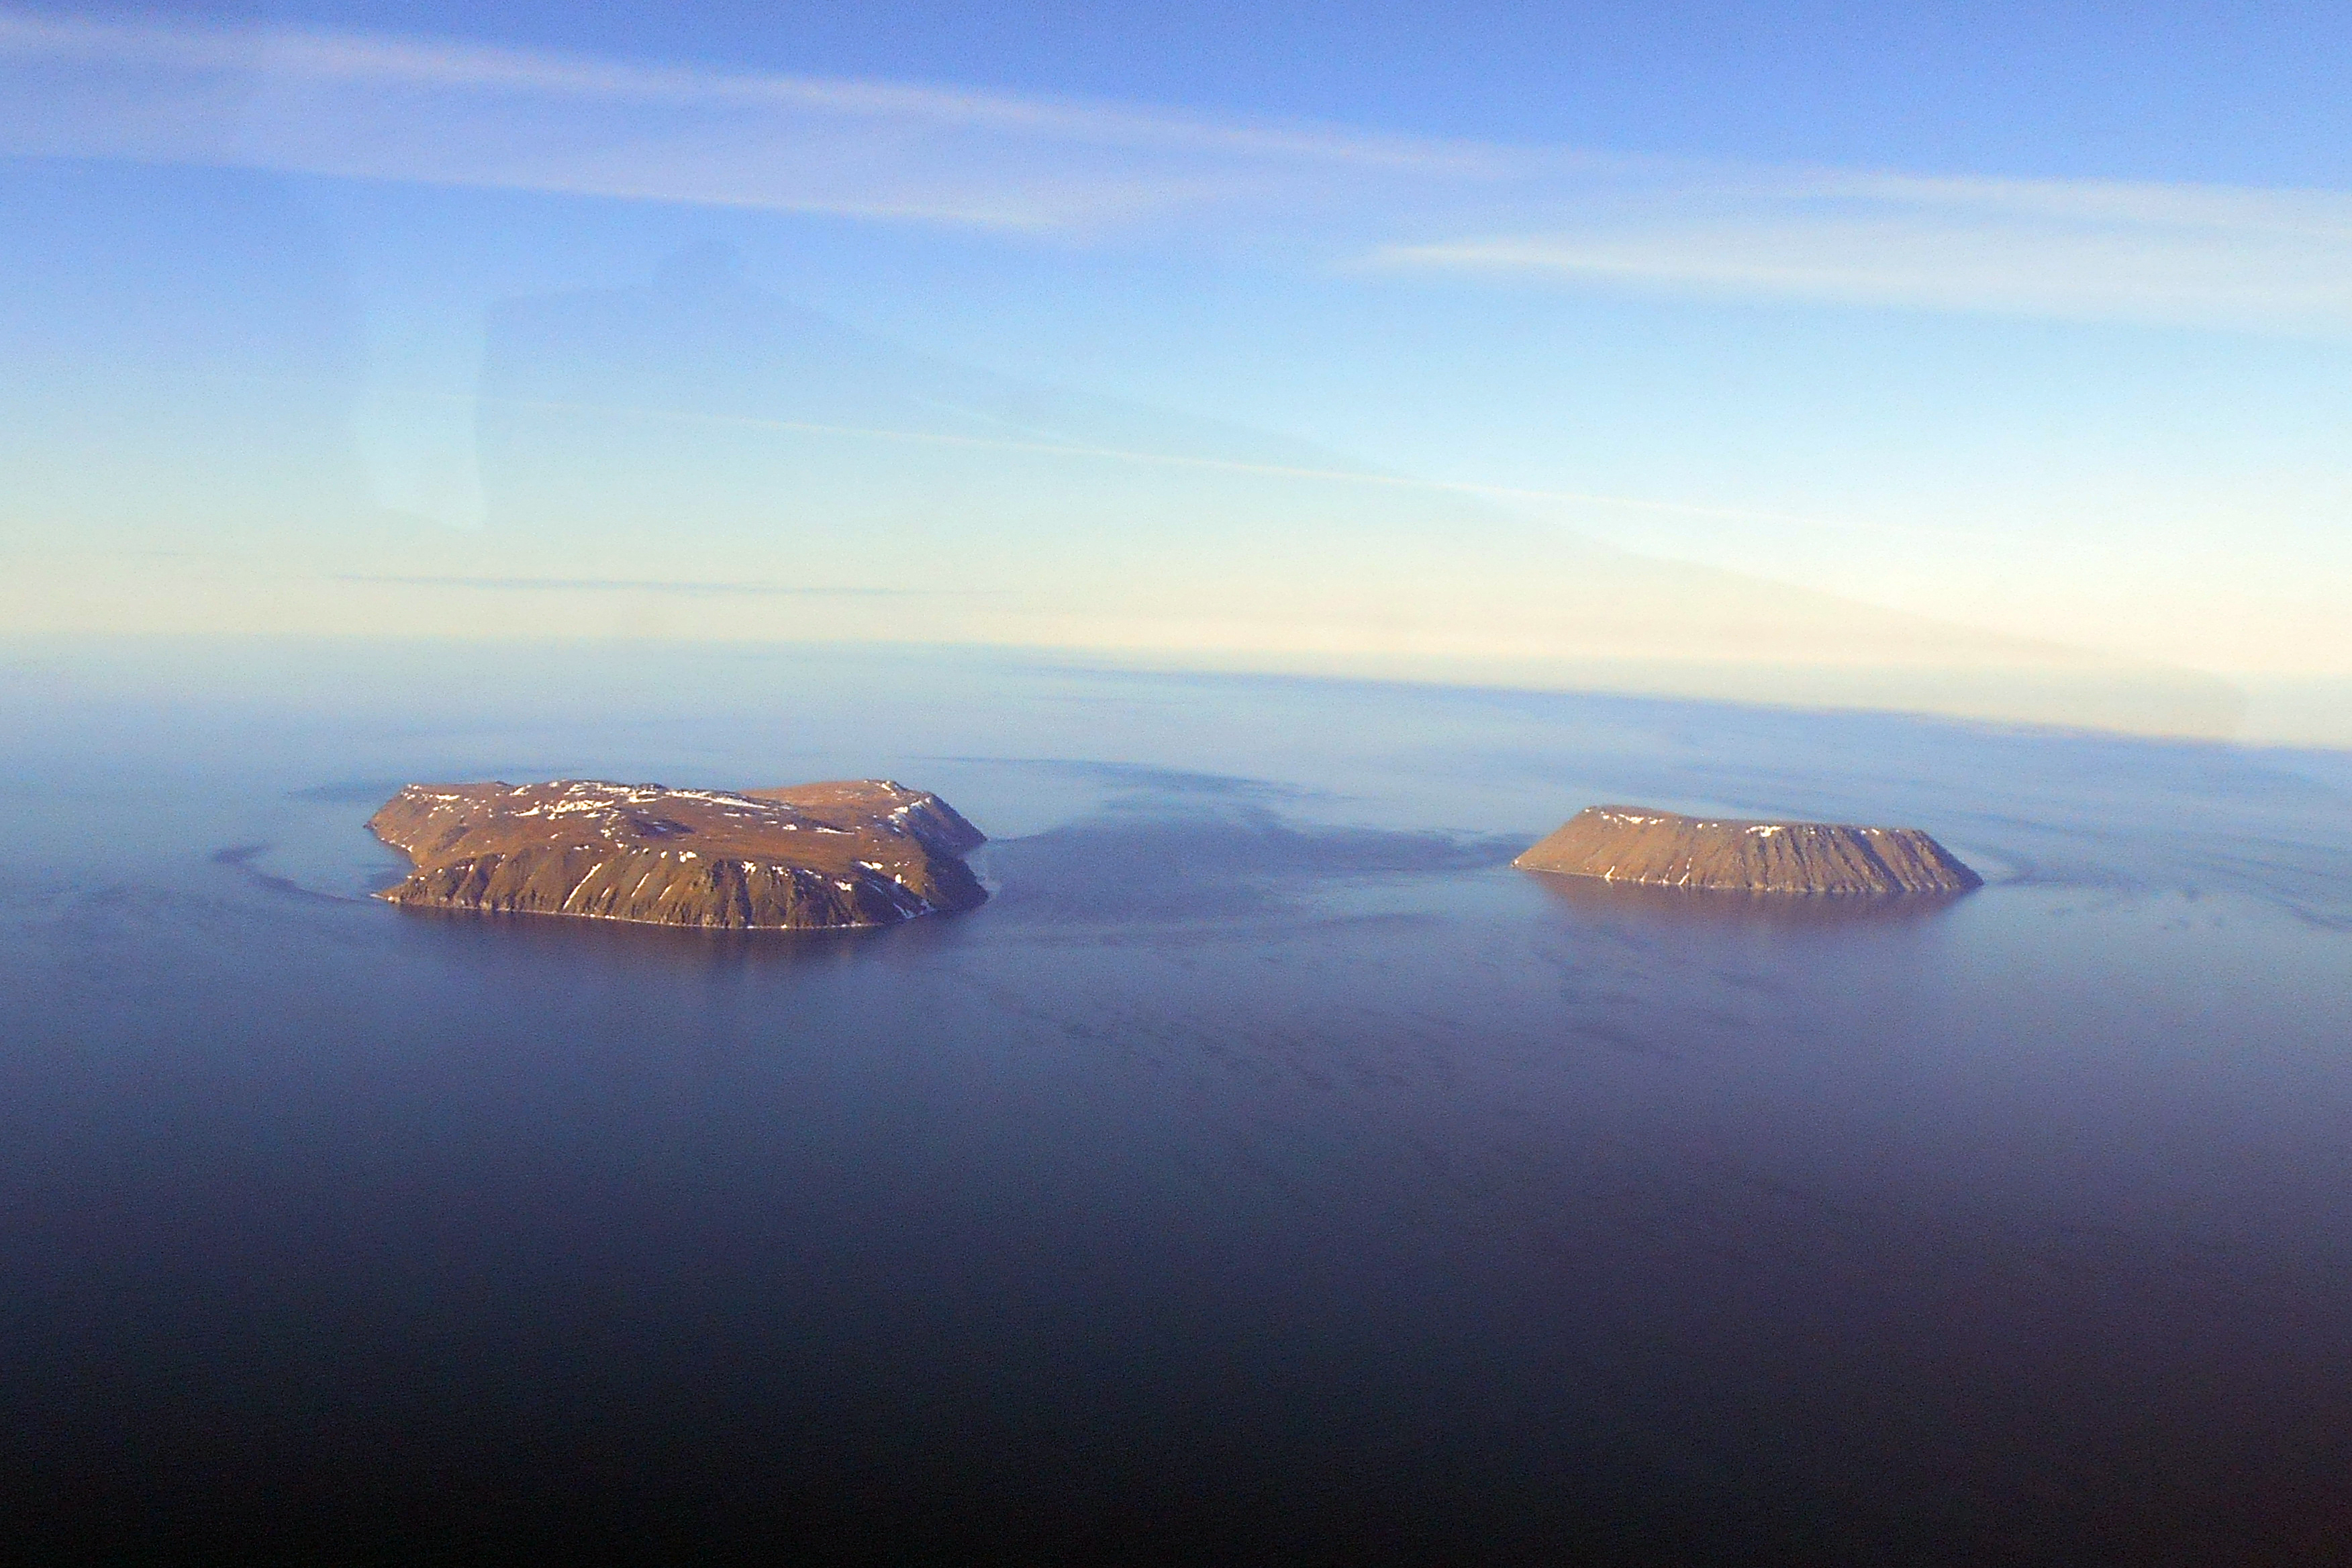 Big and Little Diomede are in the Bering Strait between Provideniya and the Seward Peninsula. (Marshall Severson)